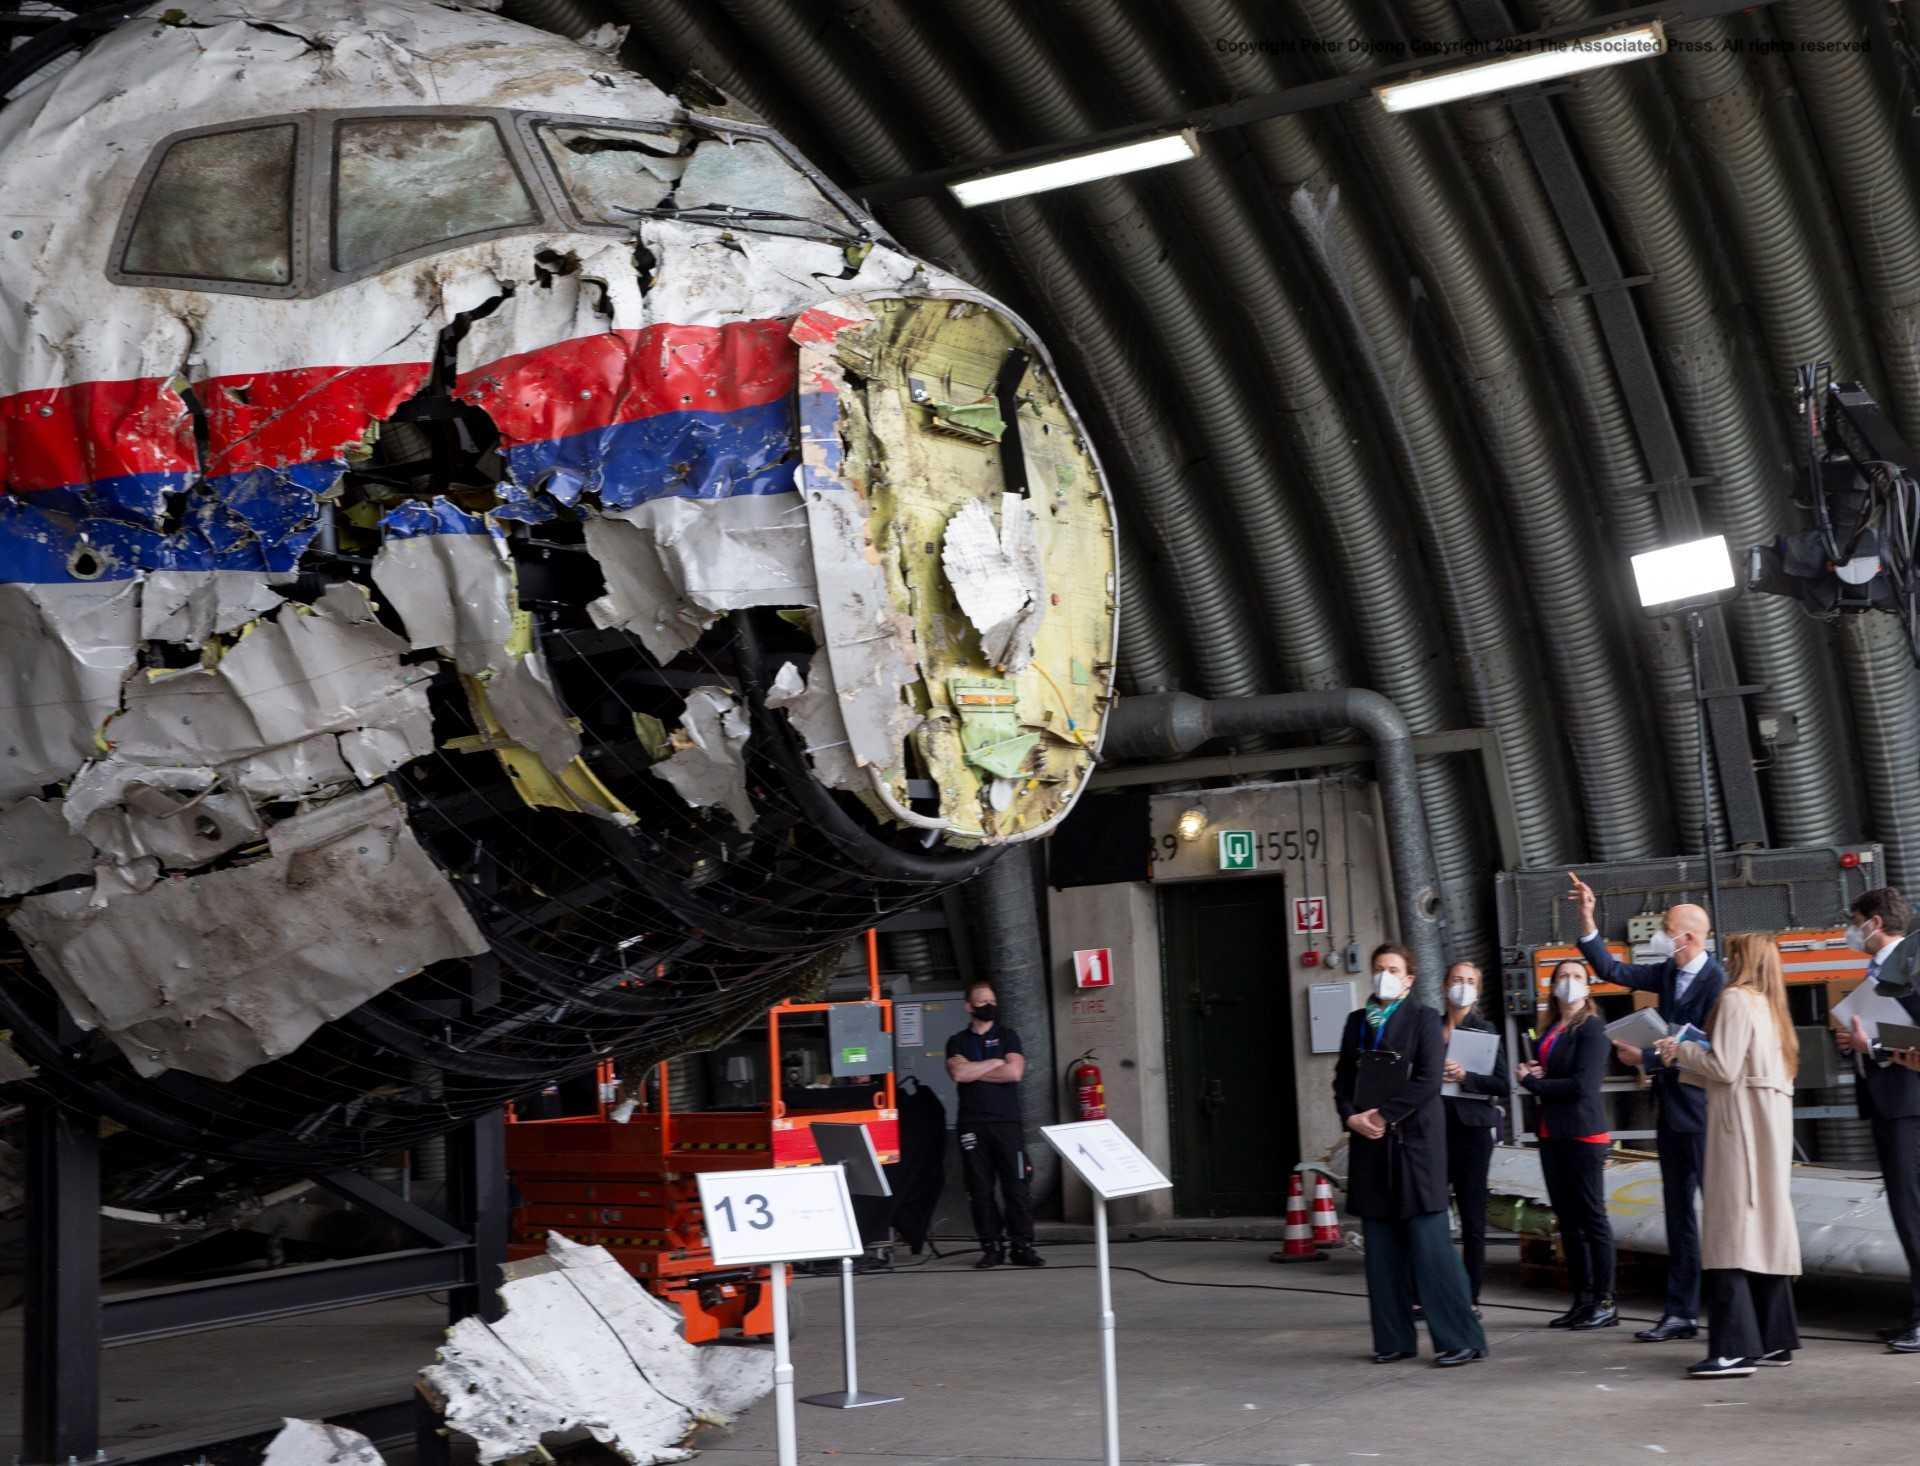 Presiding judge Hendrik Steenhuis (right) points as he and other trial judges and lawyers view the reconstructed wreckage of Malaysia Airlines flight MH17, at the Gilze-Rijen military airbase, southern Netherlands, on May 26, 2021. Photo: AFP